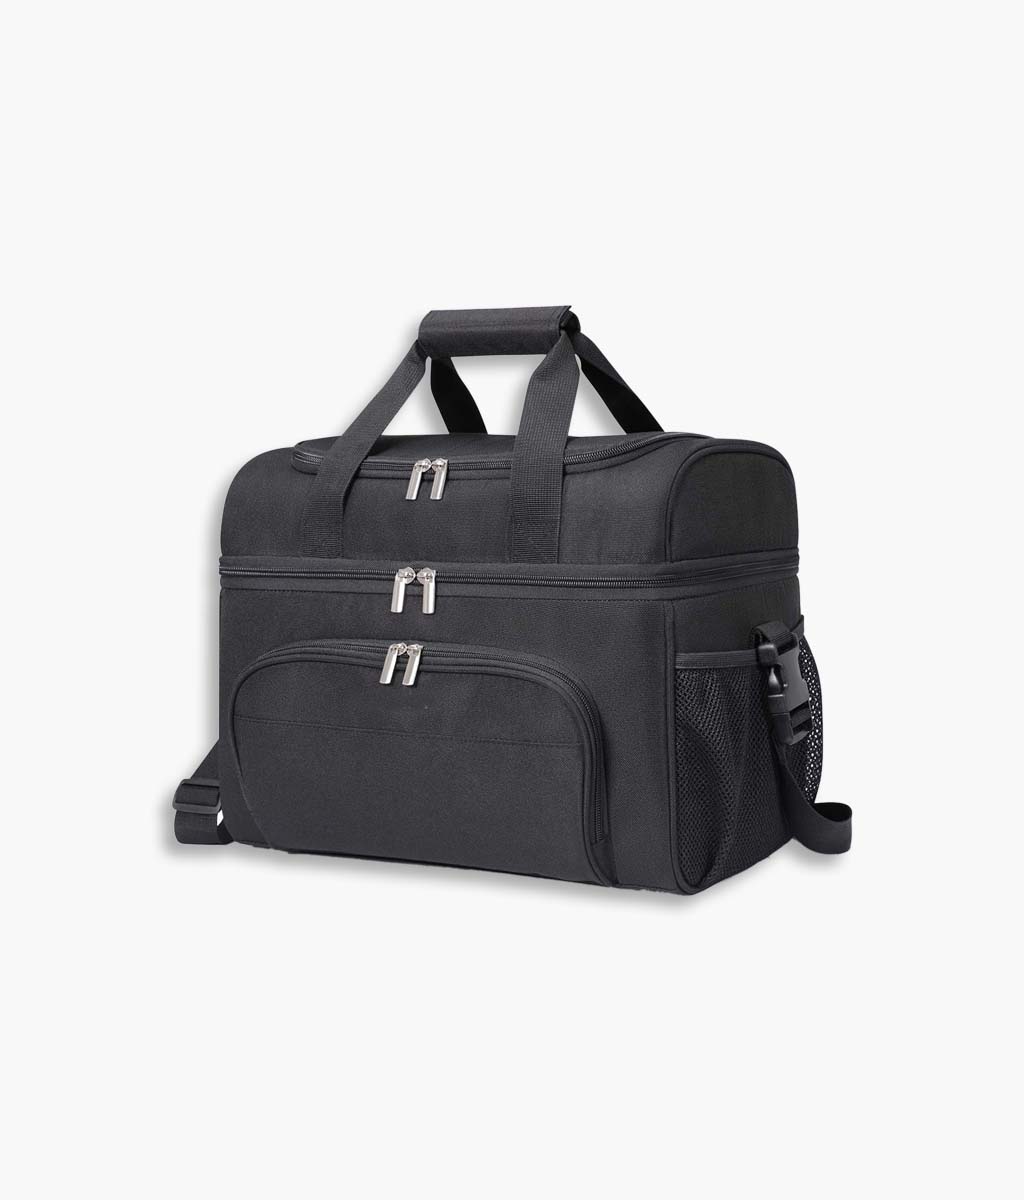 Insulated Cooler Bag 32-Can